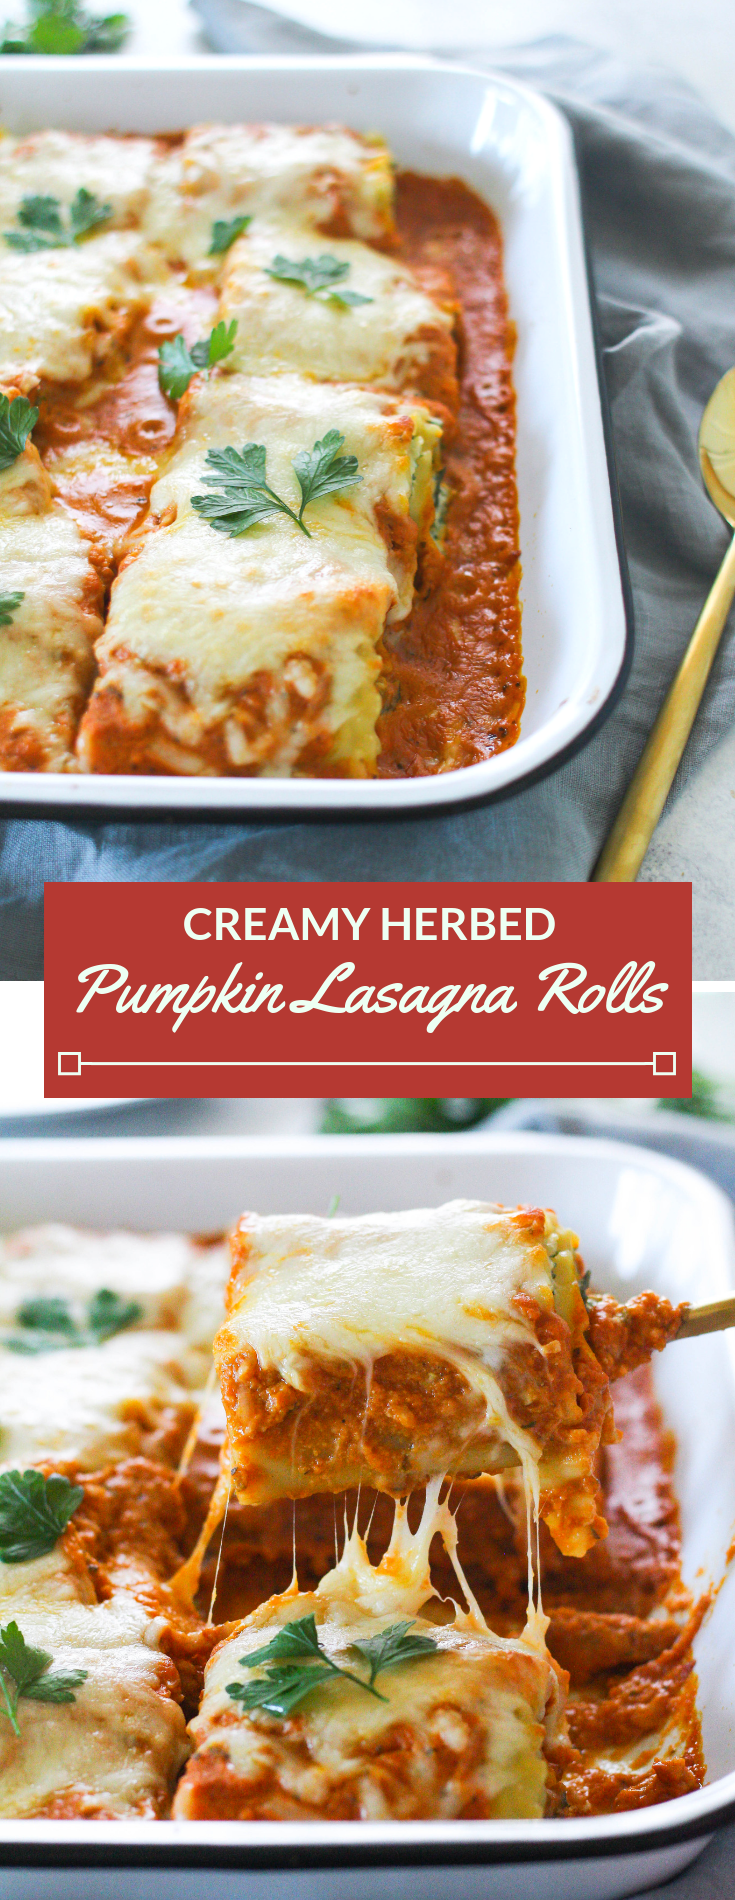 Creamy and cheesy pumpkin sauce is the highlight of this dish! Kick off the pumpkin season with these delicious pumpkin lasagna rolls stuffed with sauteed kale and onions. 